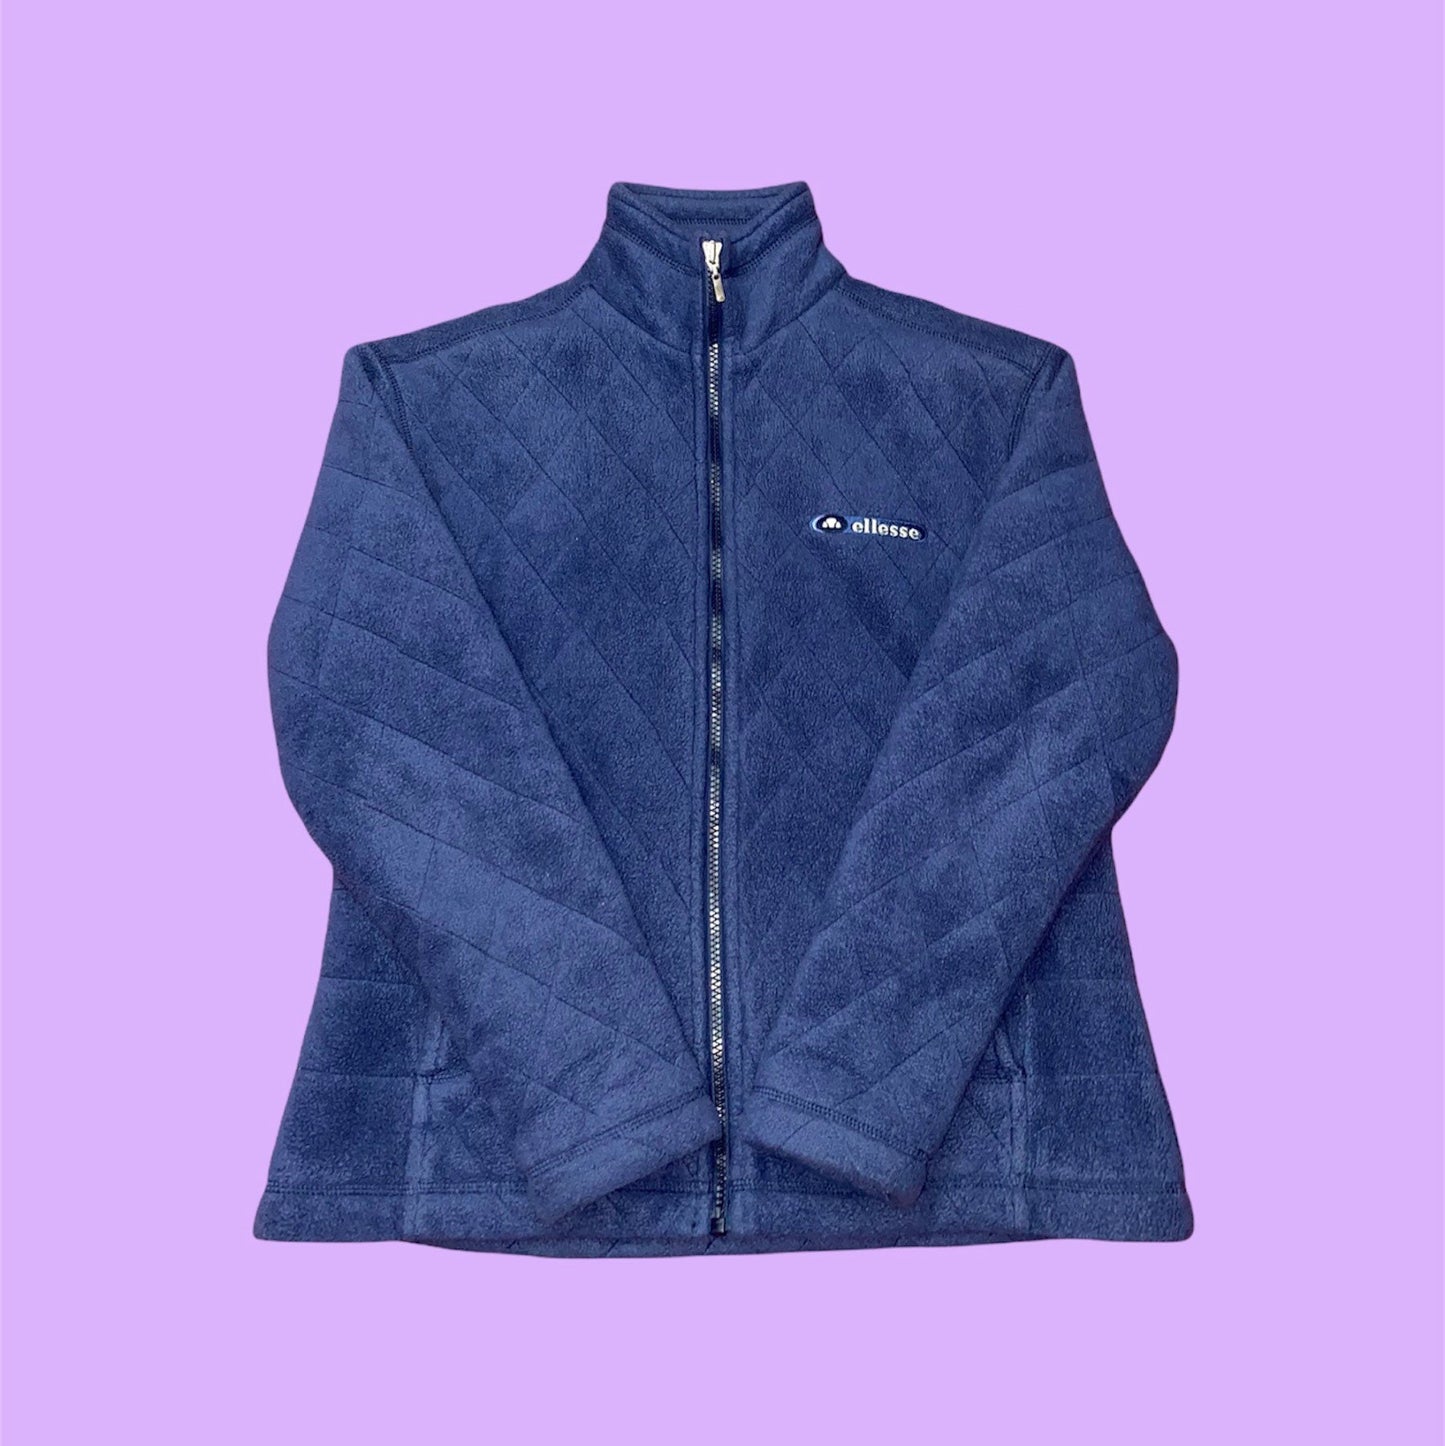 navy zip ellesse jacket with embroidered text logo on chest shown on a lilac background